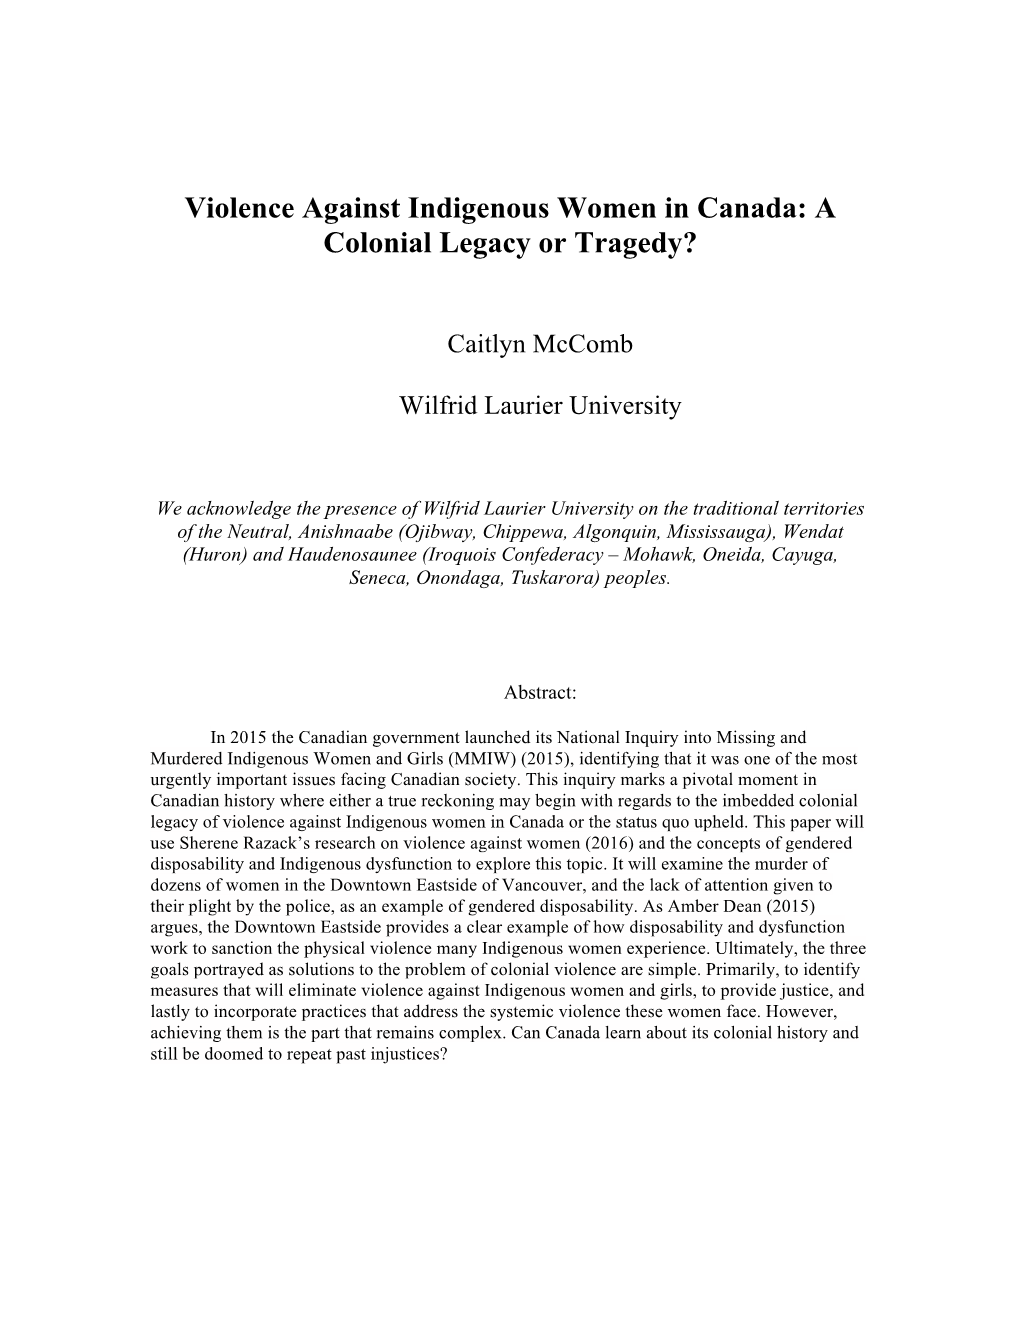 Violence Against Indigenous Women in Canada: a Colonial Legacy Or Tragedy?